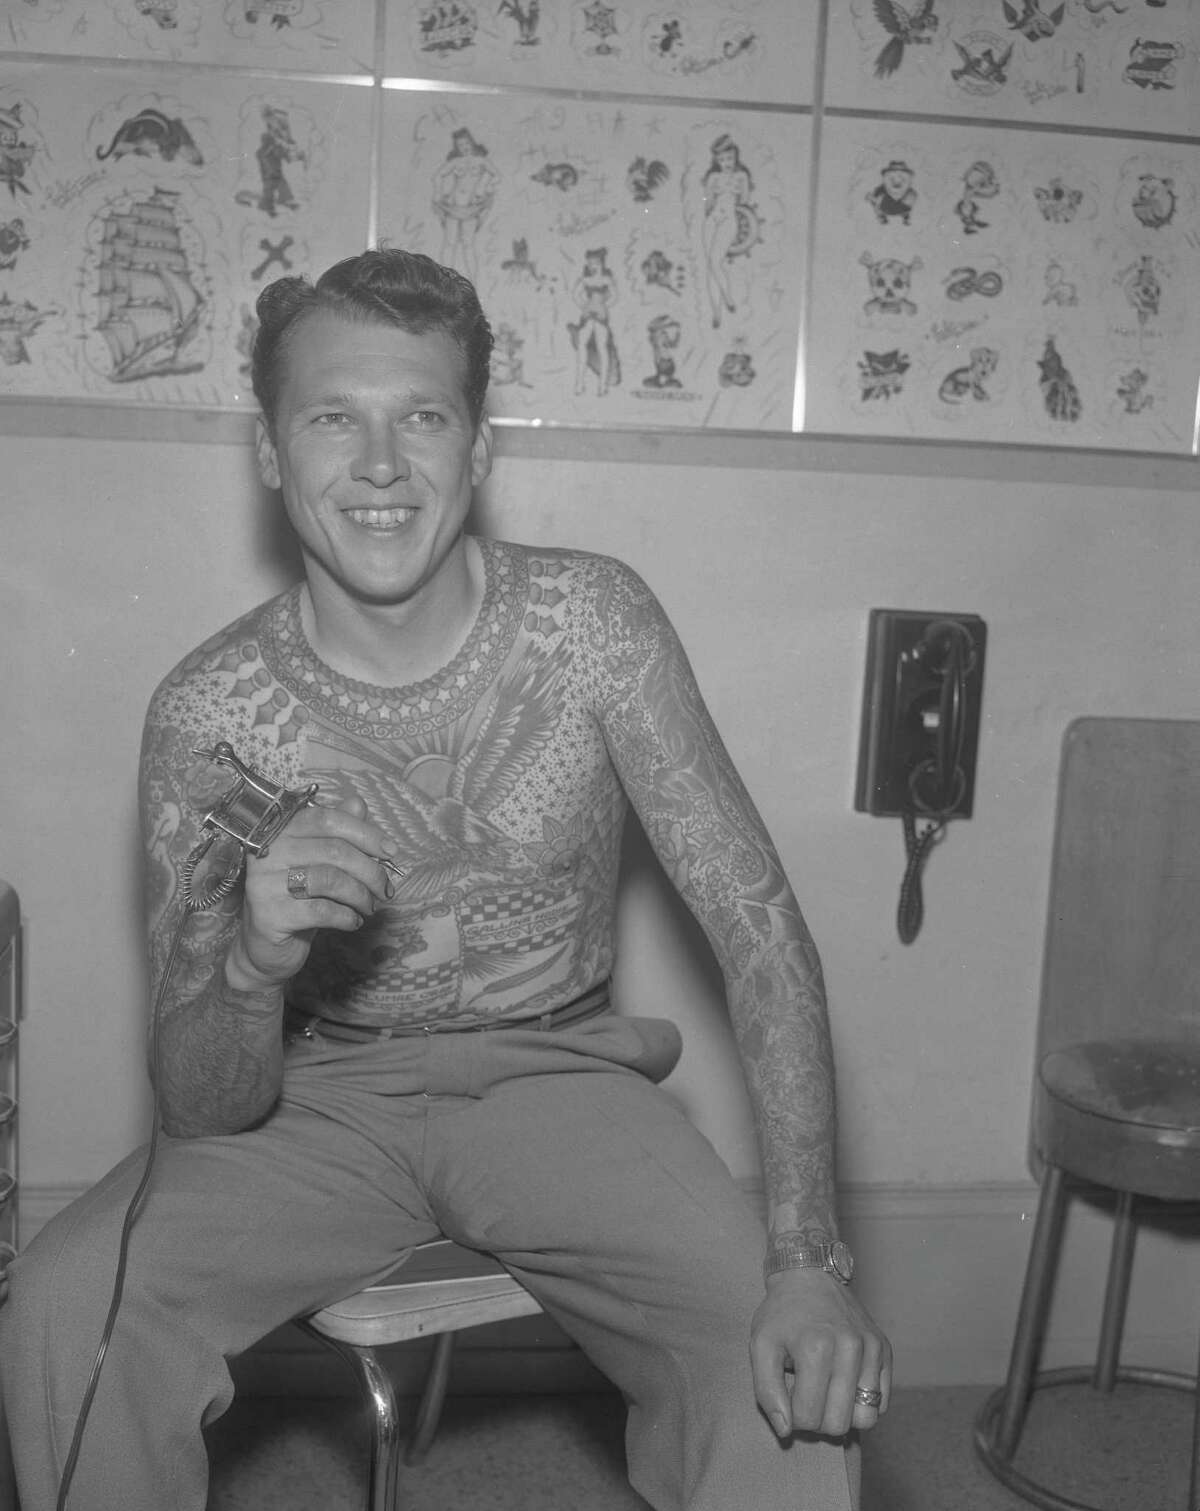 Tattoo artist Lyle Tuttle at his studio at 30 7th St. in San Francisco. 08/22/1960